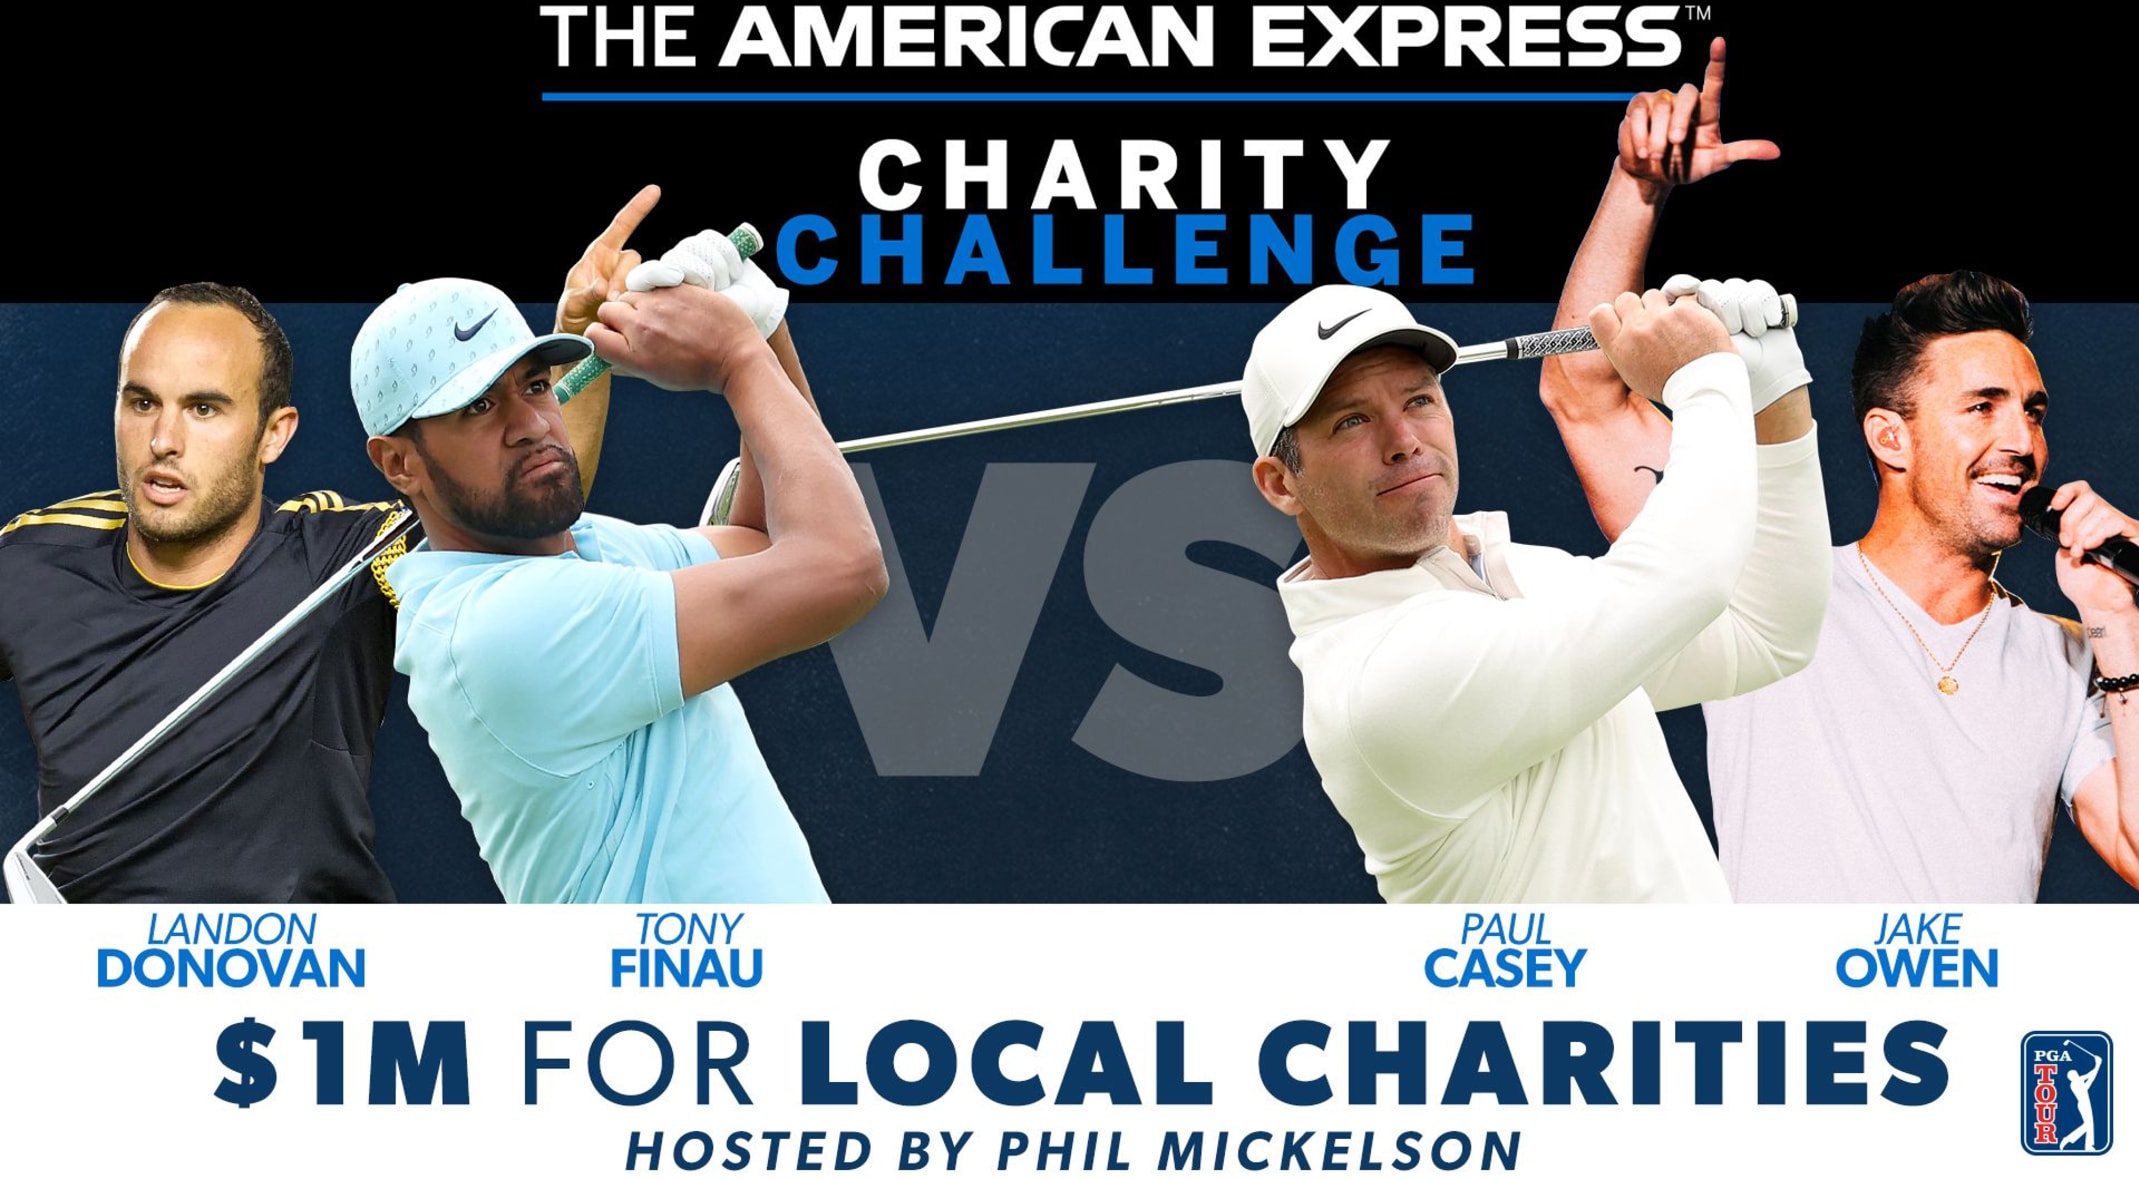 Jake Owen, Landon Donovan join The American Express 'Charity Challenge'  with Mickelson, Finau and Casey